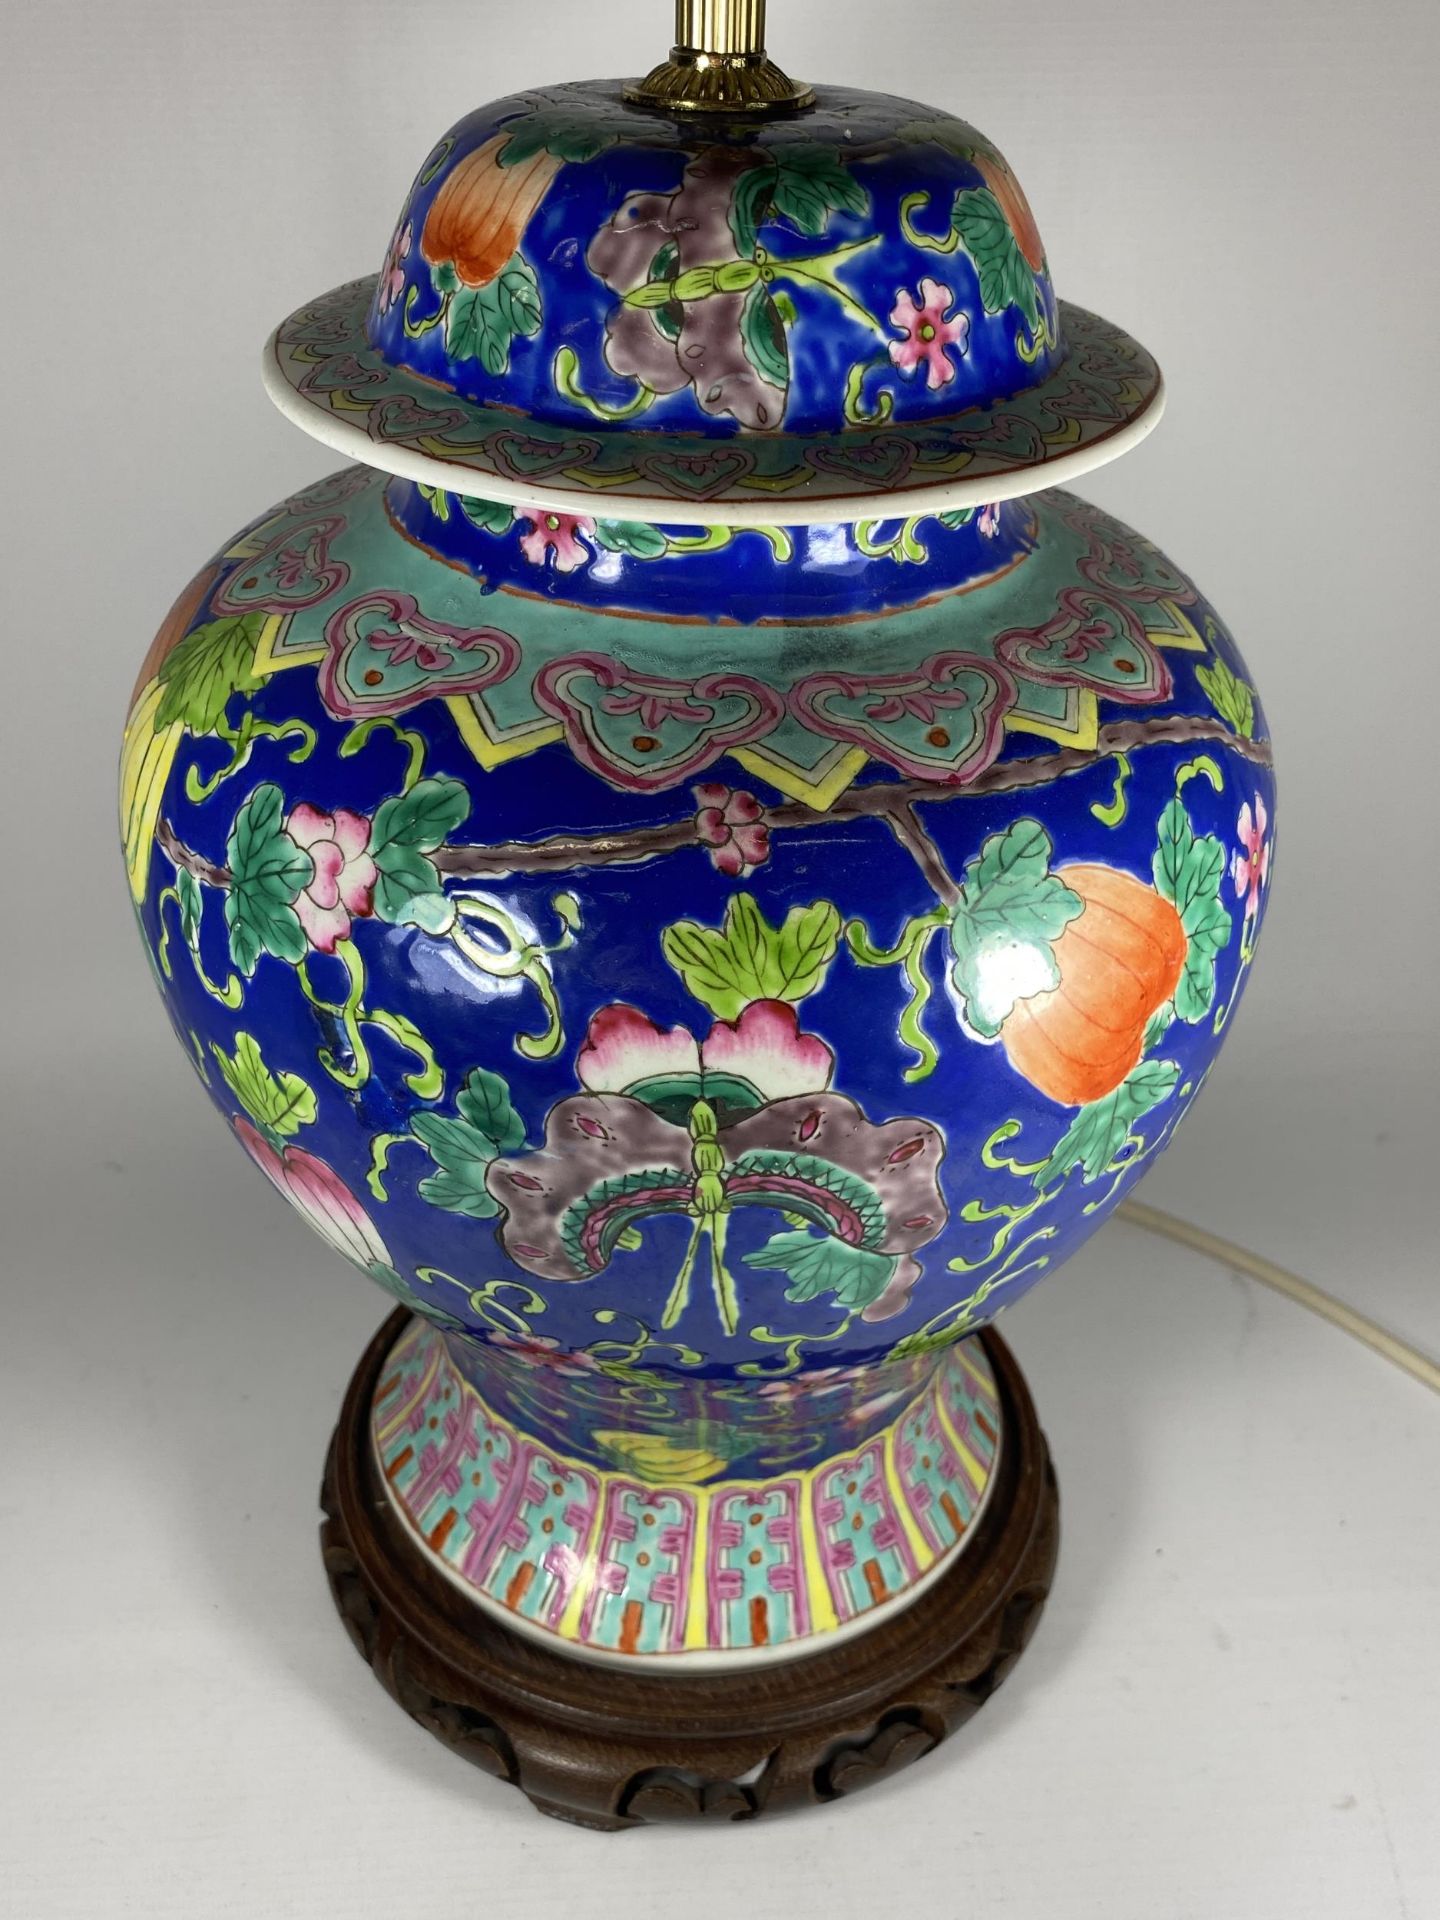 A LARGE CHINESE ENAMEL DESIGN PEACH BLOSSOM TABLE LAMP ON CARVED WOODEN BASE, HEIGHT INCLUDING - Image 2 of 4